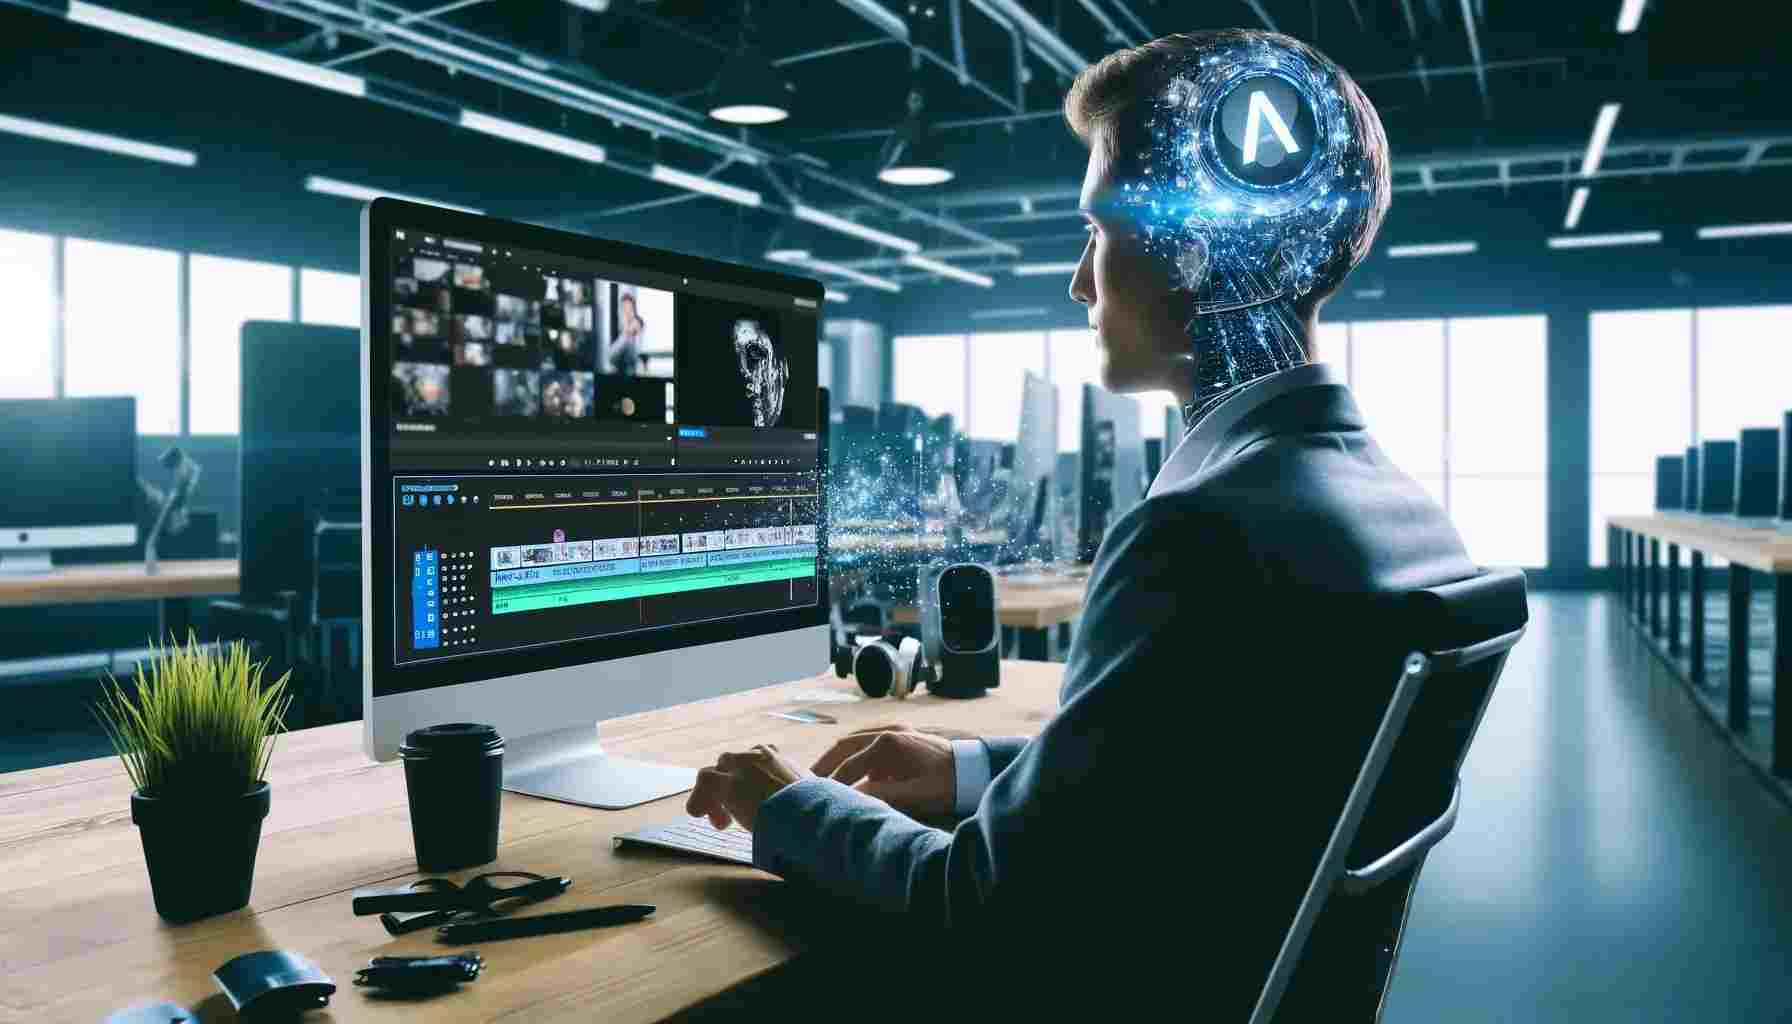 ai-video-tools-revolutionizing-video-production-enhancing-efficiency-creativity-accessibility-reducing-costs-ensuring-consistency-accuracy